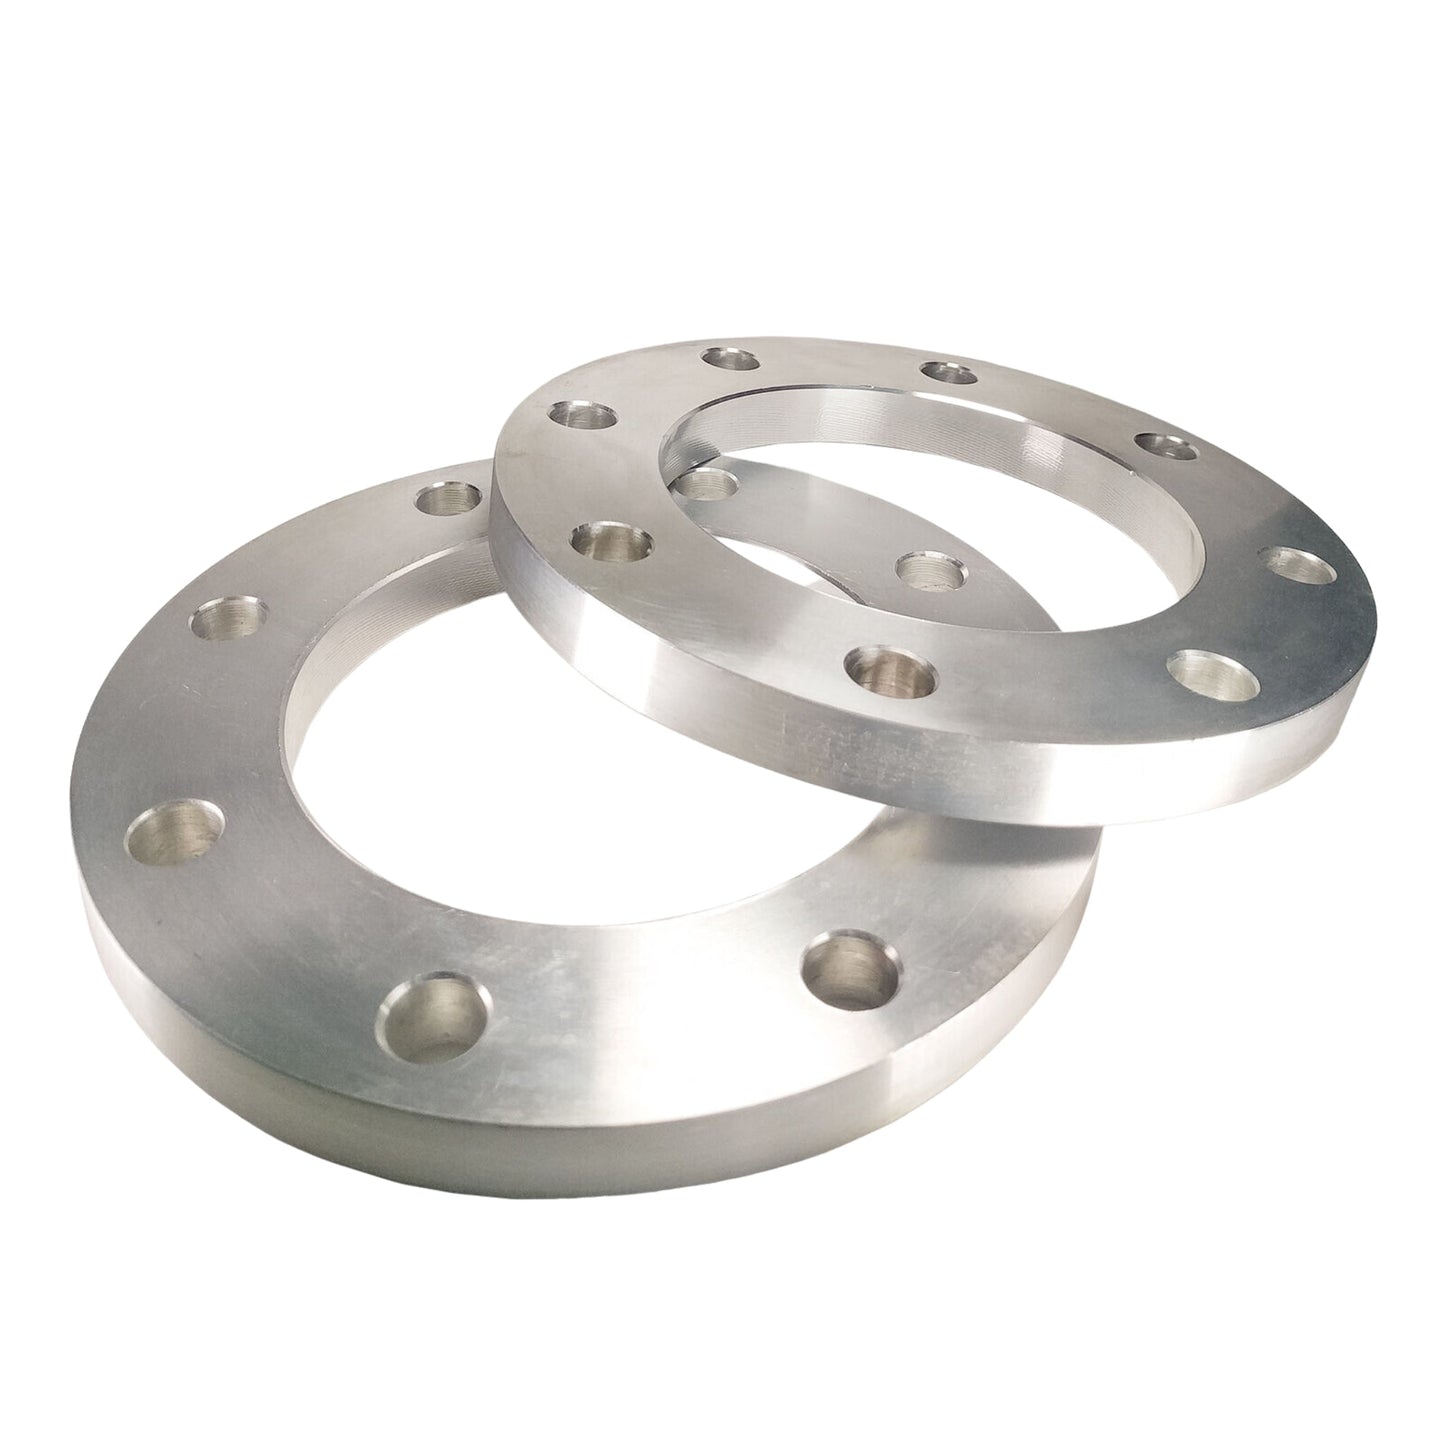 8x200 Wheel Spacers - Thickness: 10mm-1.0"